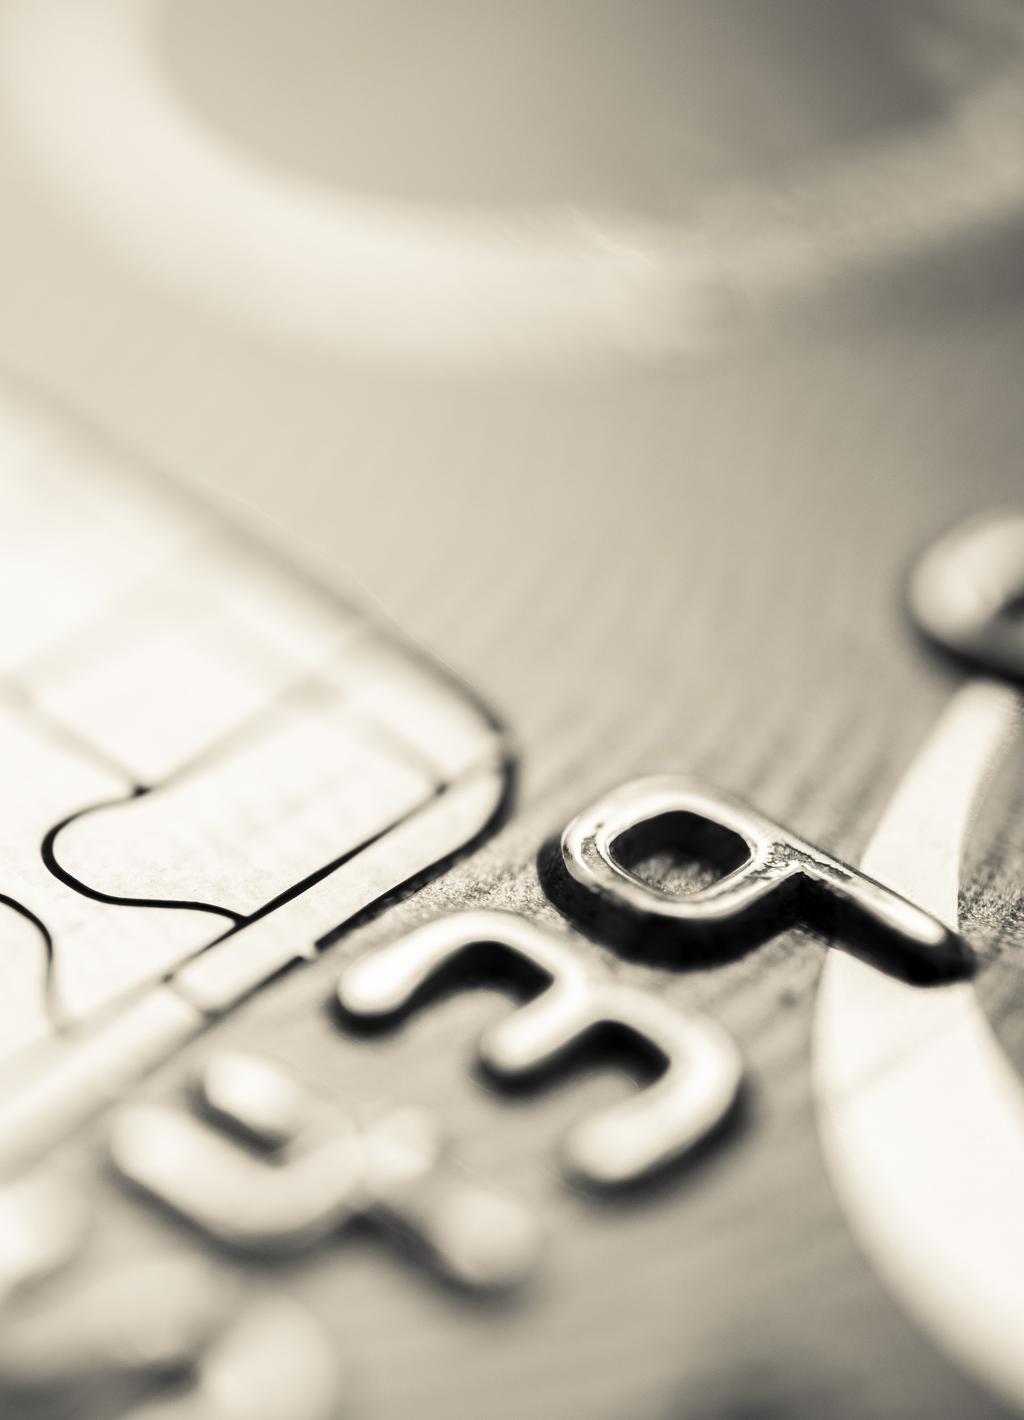 EMV: Frequently Asked Questions for Merchants The information in this document is offered on an as is basis, without warranty of any kind, either expressed, implied or statutory, including but not